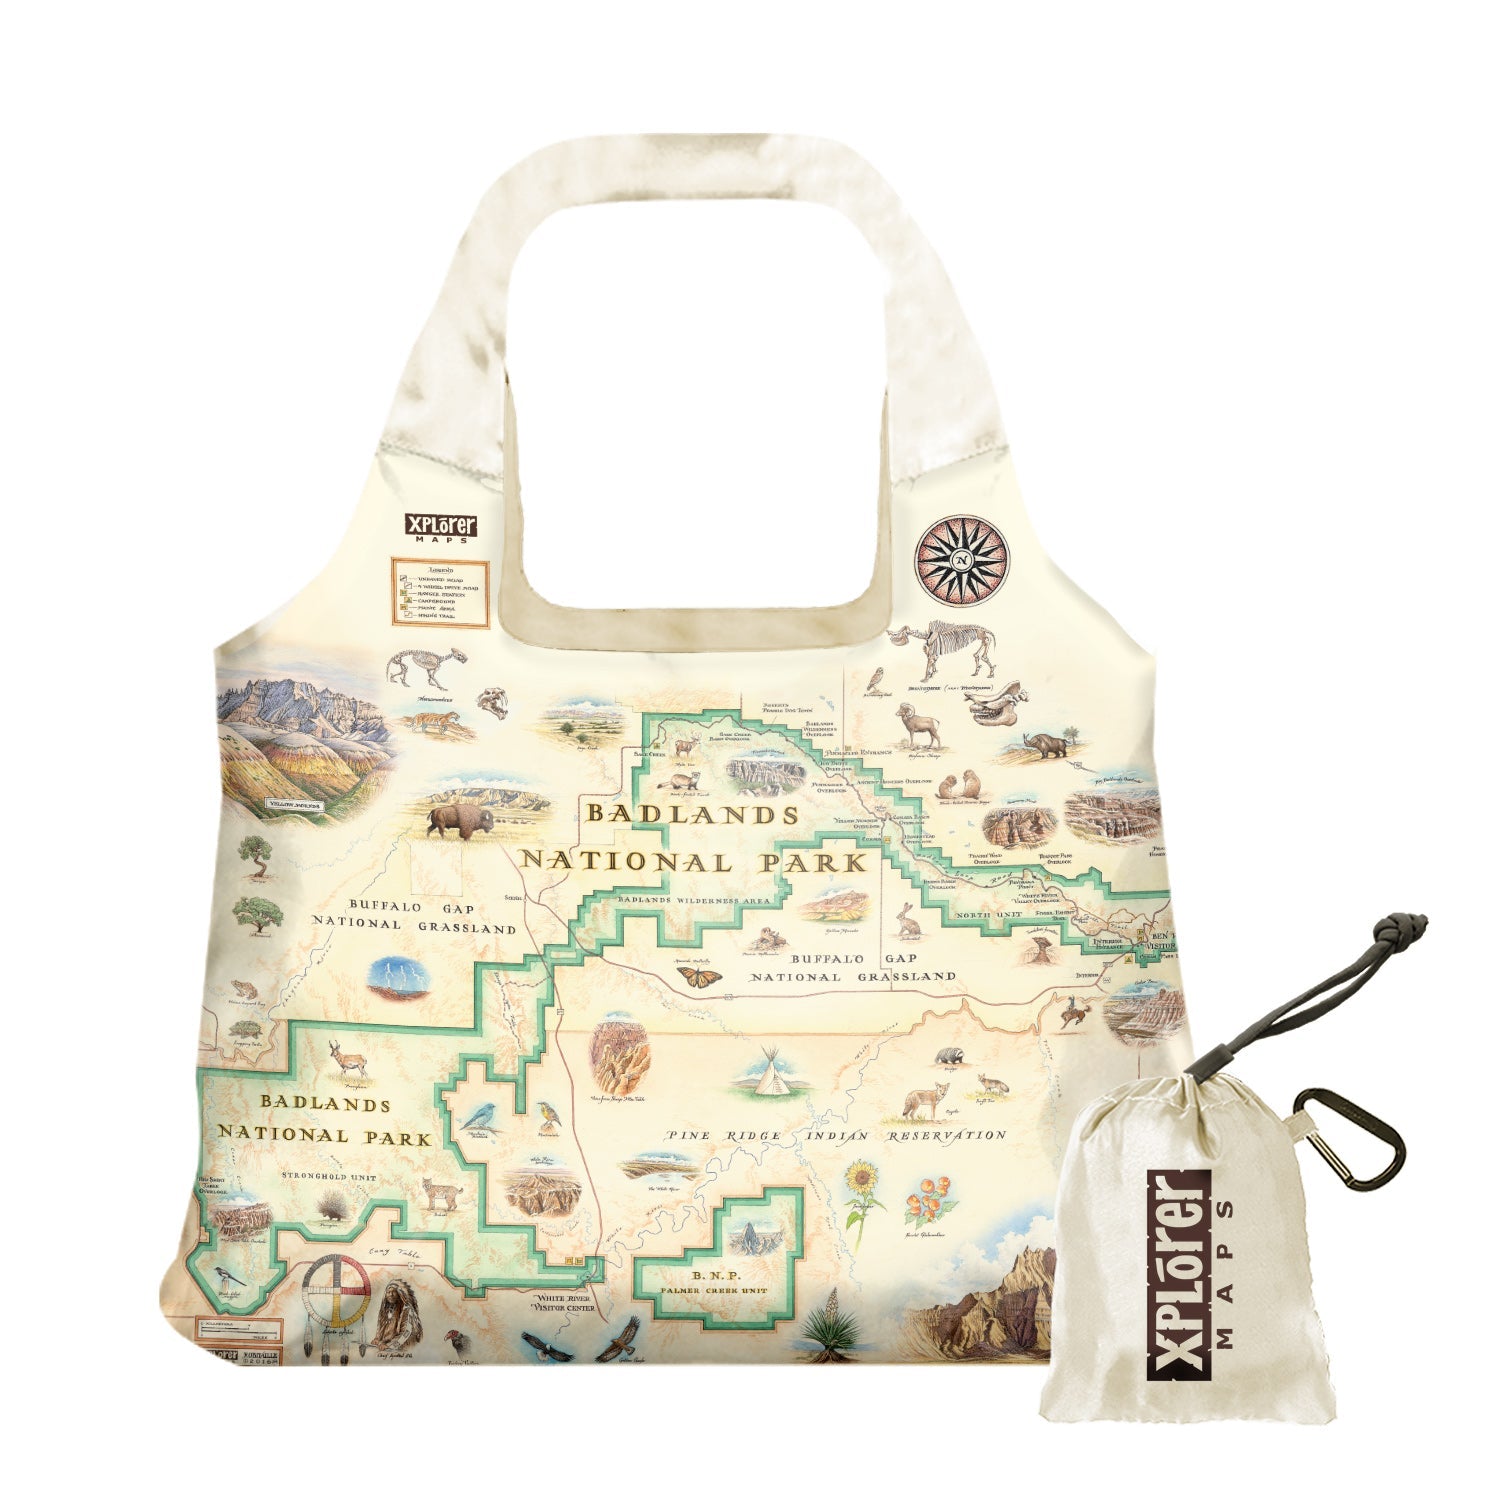 Badlands National Park map nylon stuffable pouch tote bag in earth tone colors.  Featuring Buffalo Gap Grasslands, Vulture Peak, and Yellow Mounds Overlook. Flora and fauna of Jasper Tree, Yucca plant, deer, dinosaurs, birds, and fox.